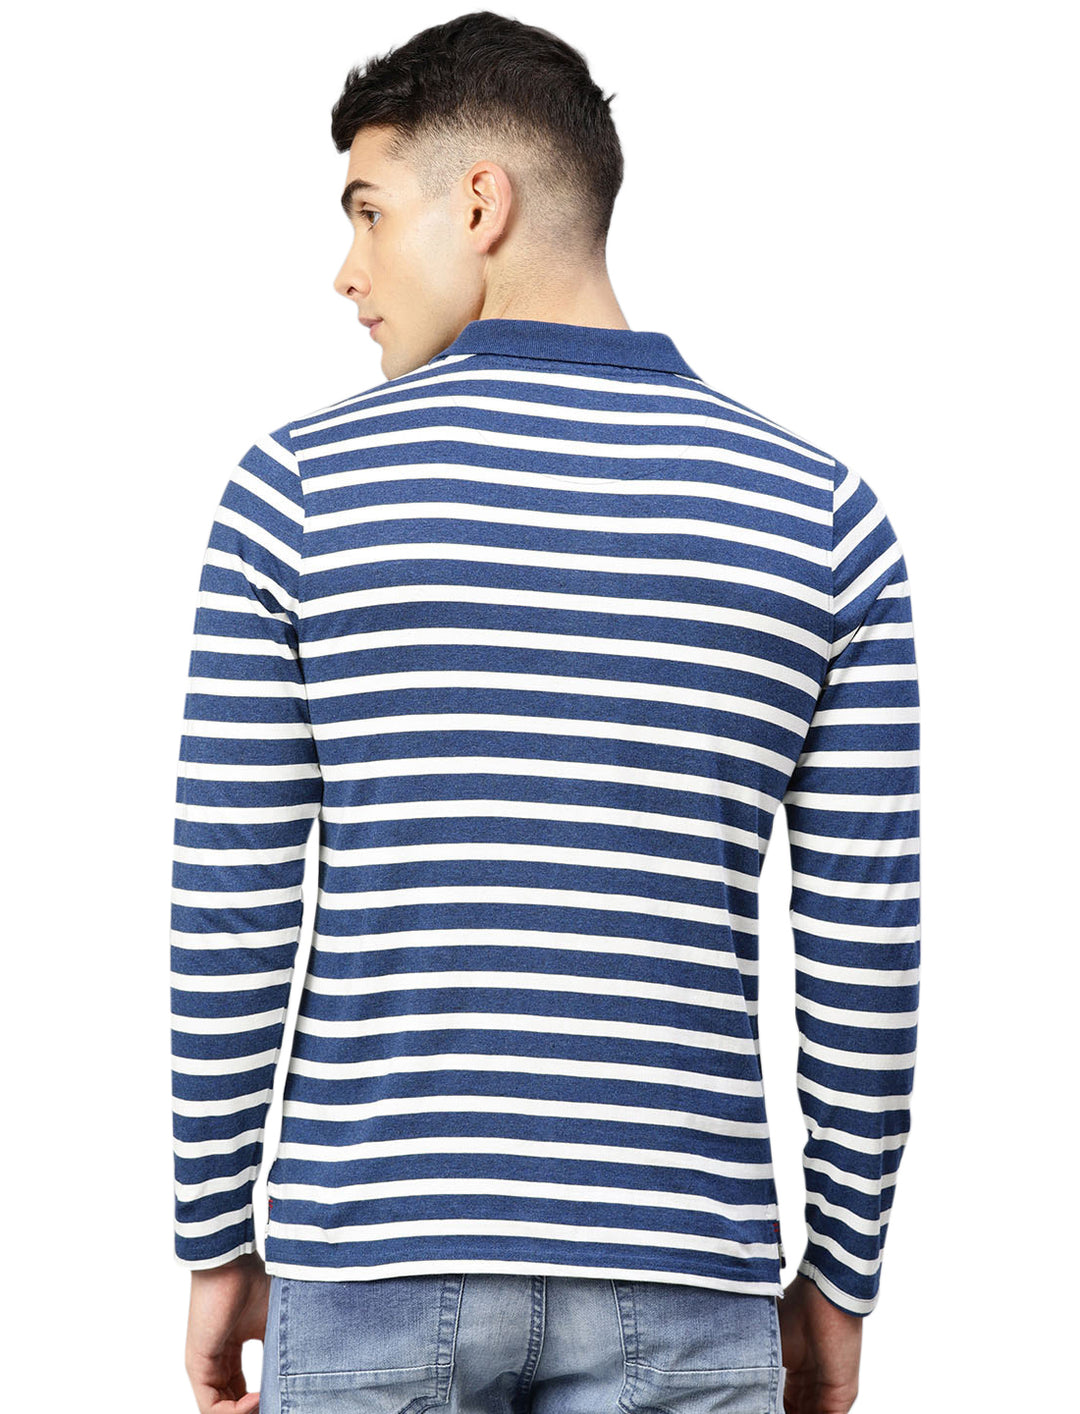 Men's Polo Collar Full Sleeves Yarn Dyed Striped Cotton T-Shirt - Navy / White